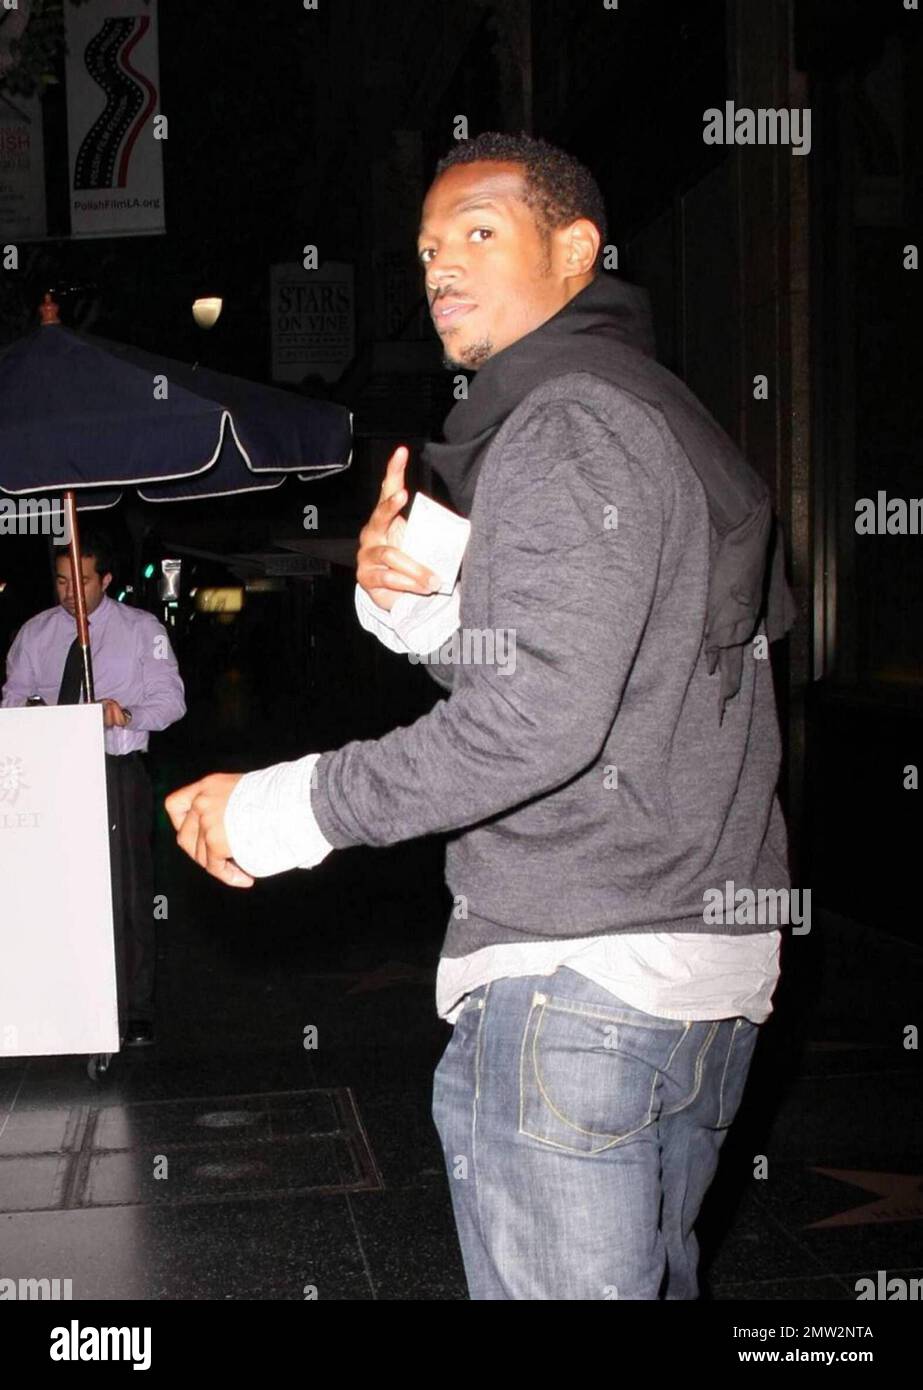 Damon Wayans and family leave the restaurant Katsuya after a family night out. Los Angeles, CA. 4/30/09. Stock Photo